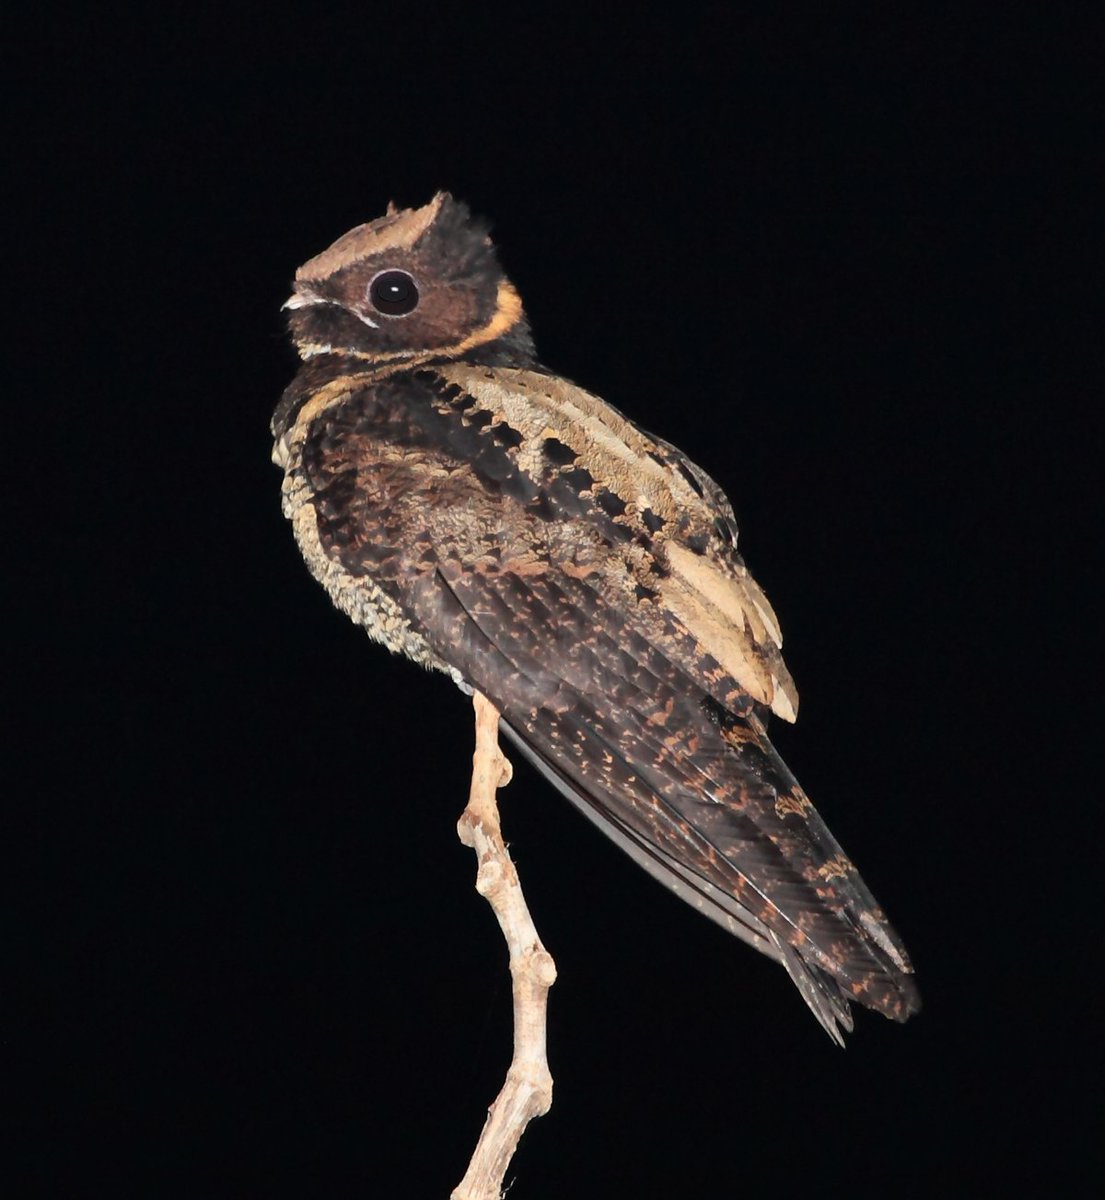 Go fuck yourself
anyway look at the Great Eared Nightjar!! :D